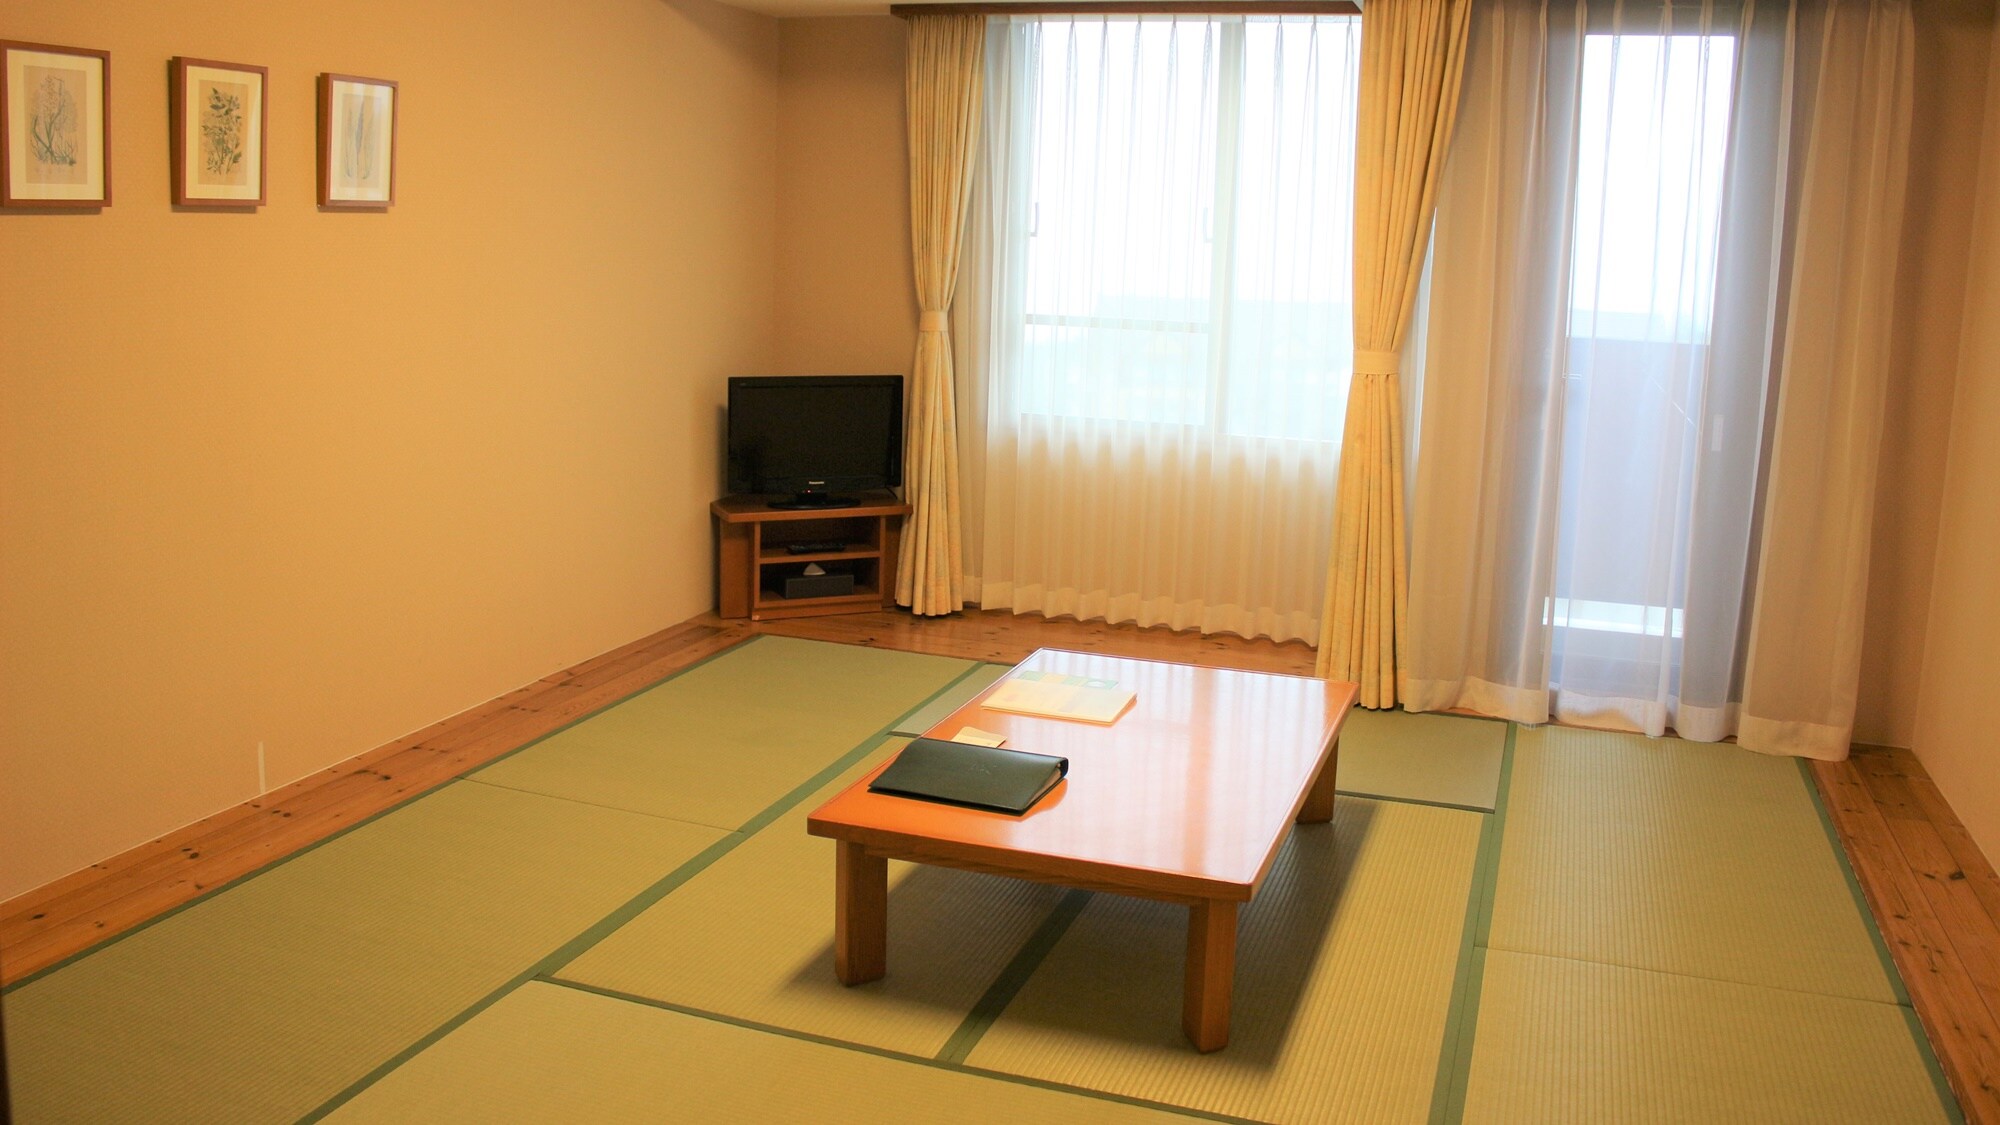 A compact Japanese-style room where you can take off your shoes and relax. (Capacity for 4 people)